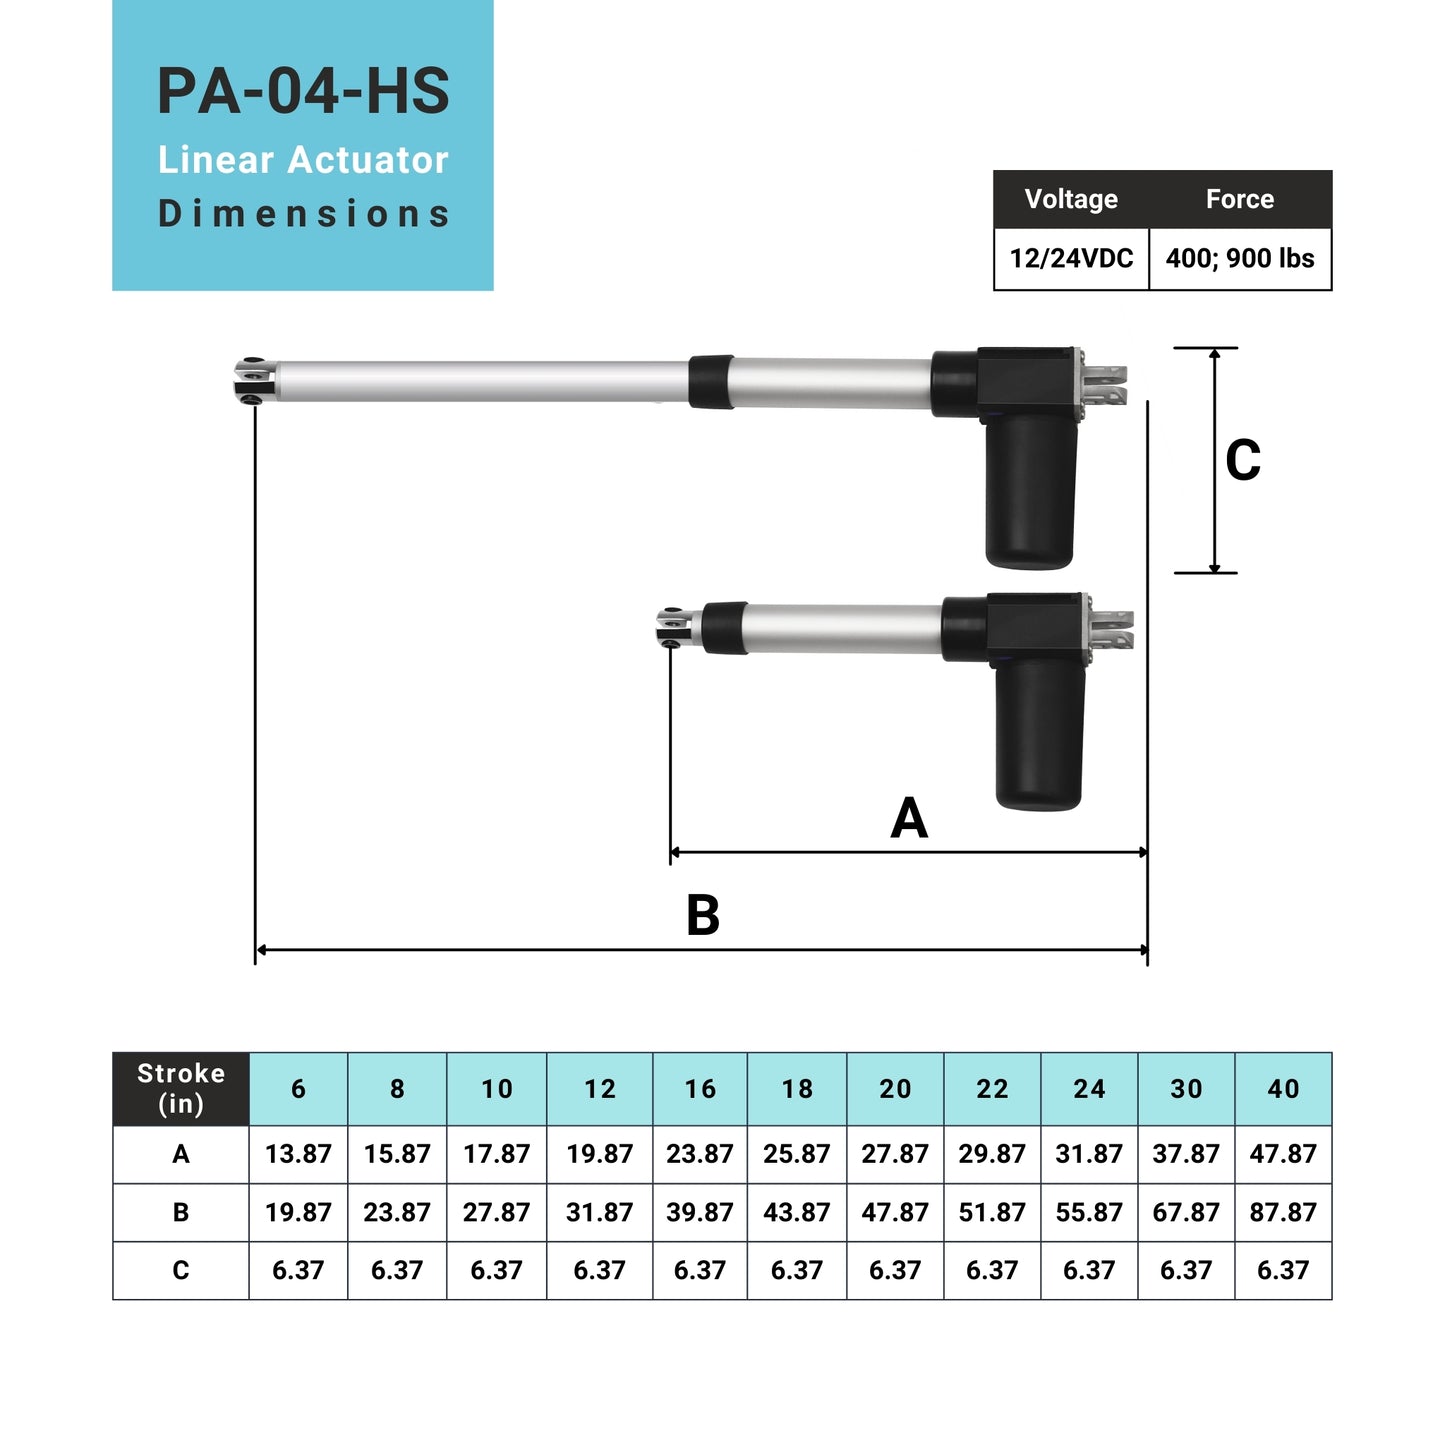 PA-04-HS 12/24VDC 400; 900lbs dimensions in inches